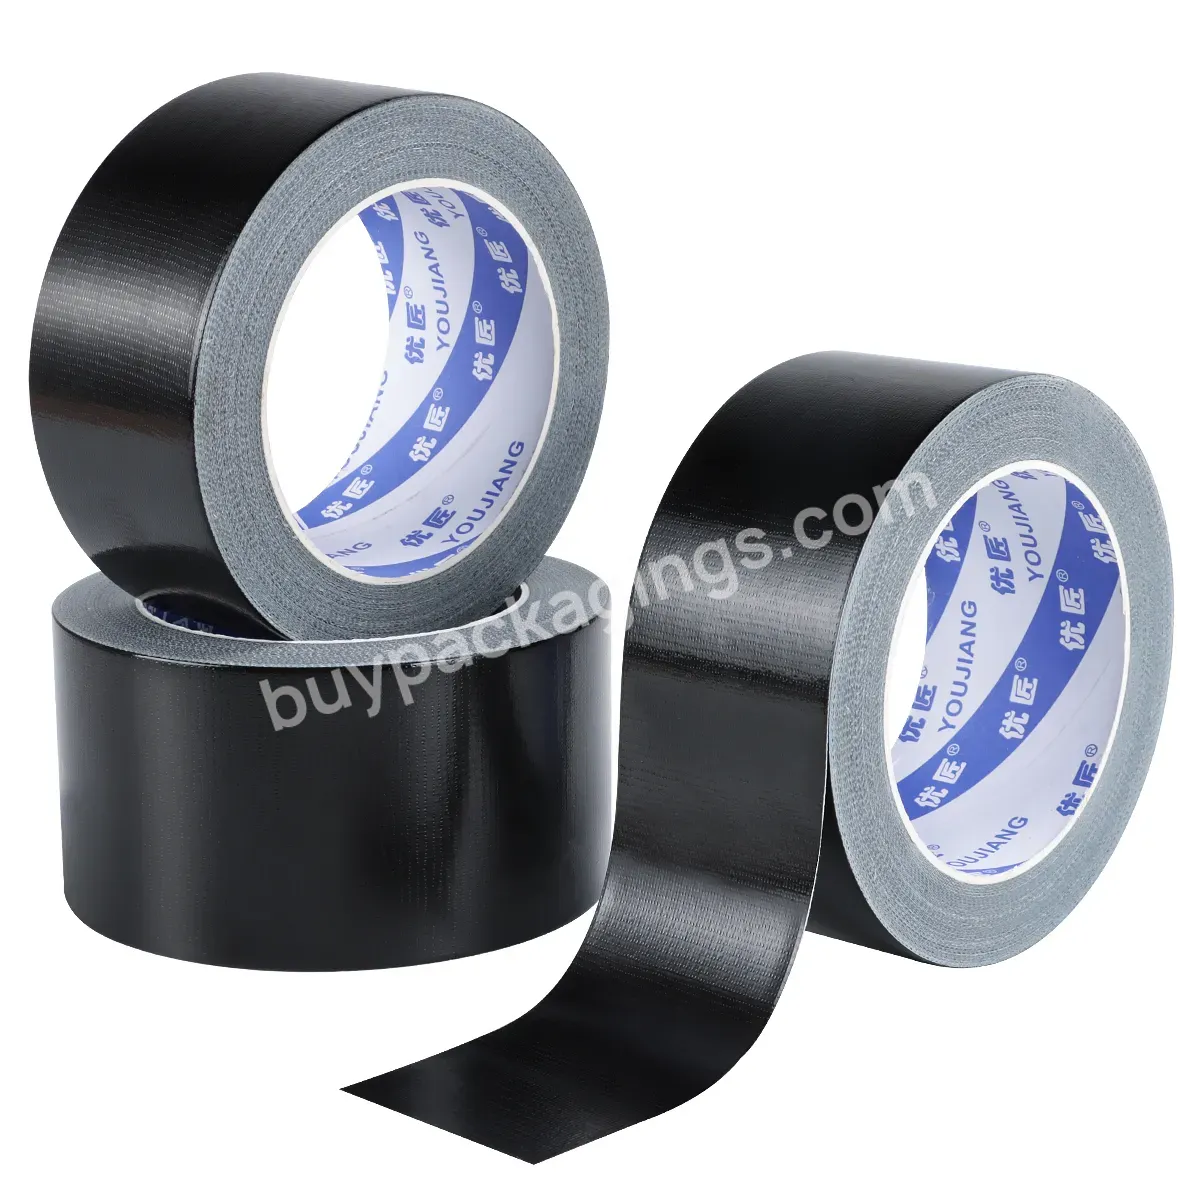 You Jiang High Performance Cloth Tape Blue Grey Super Strong Rubber Adhesive Duct Tape 270um Thickness - Buy Strong Rubber Adhesive Duct Tape,High Performance Cloth Tape,White Duct Tape.